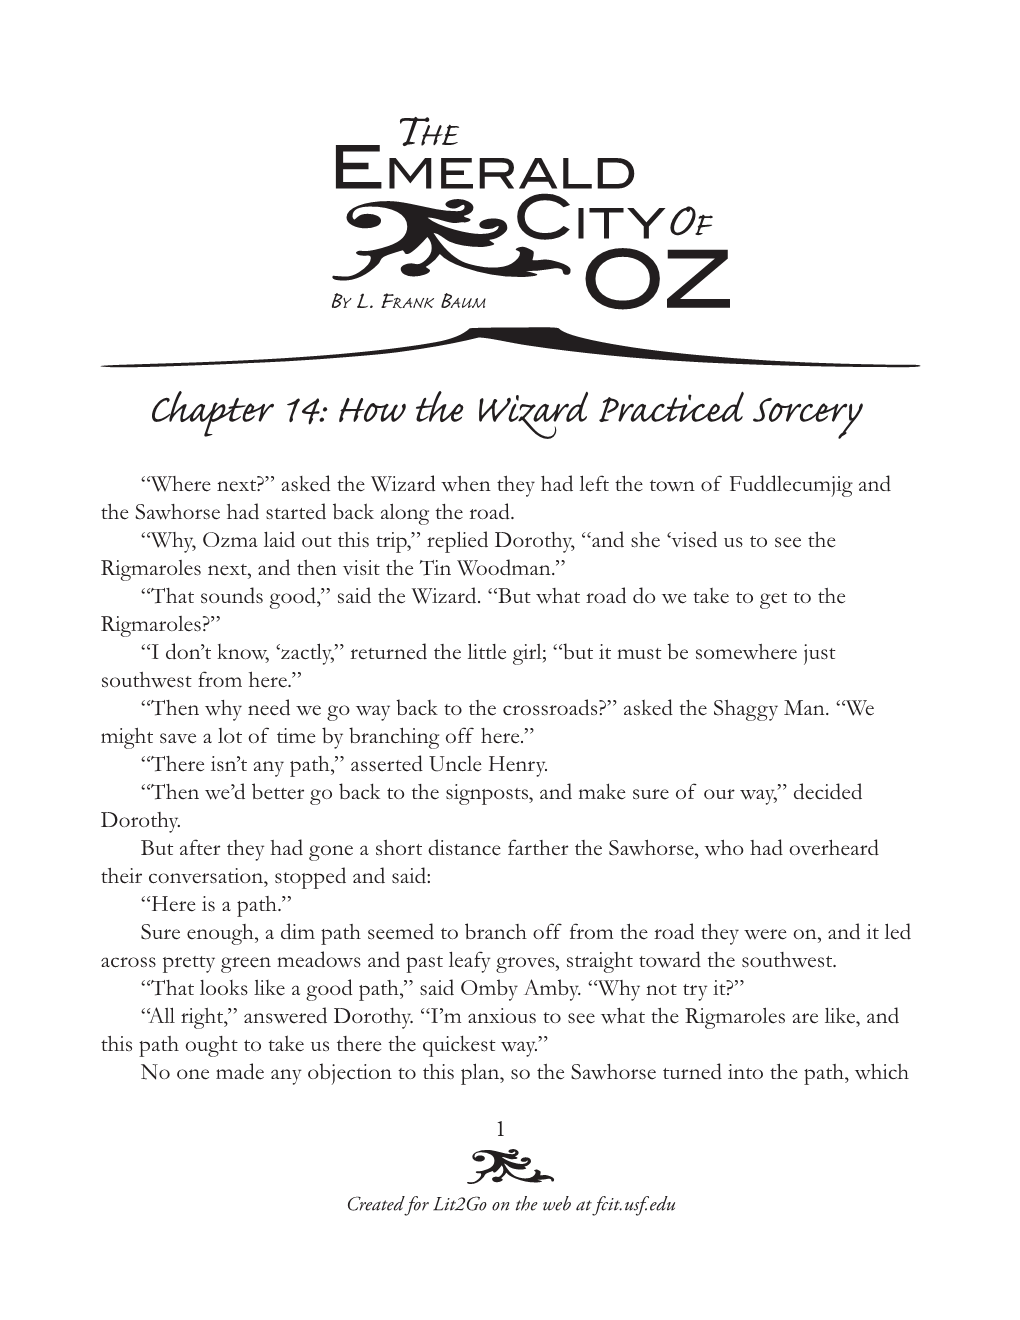 Chapter 14: How the Wizard Practiced Sorcery